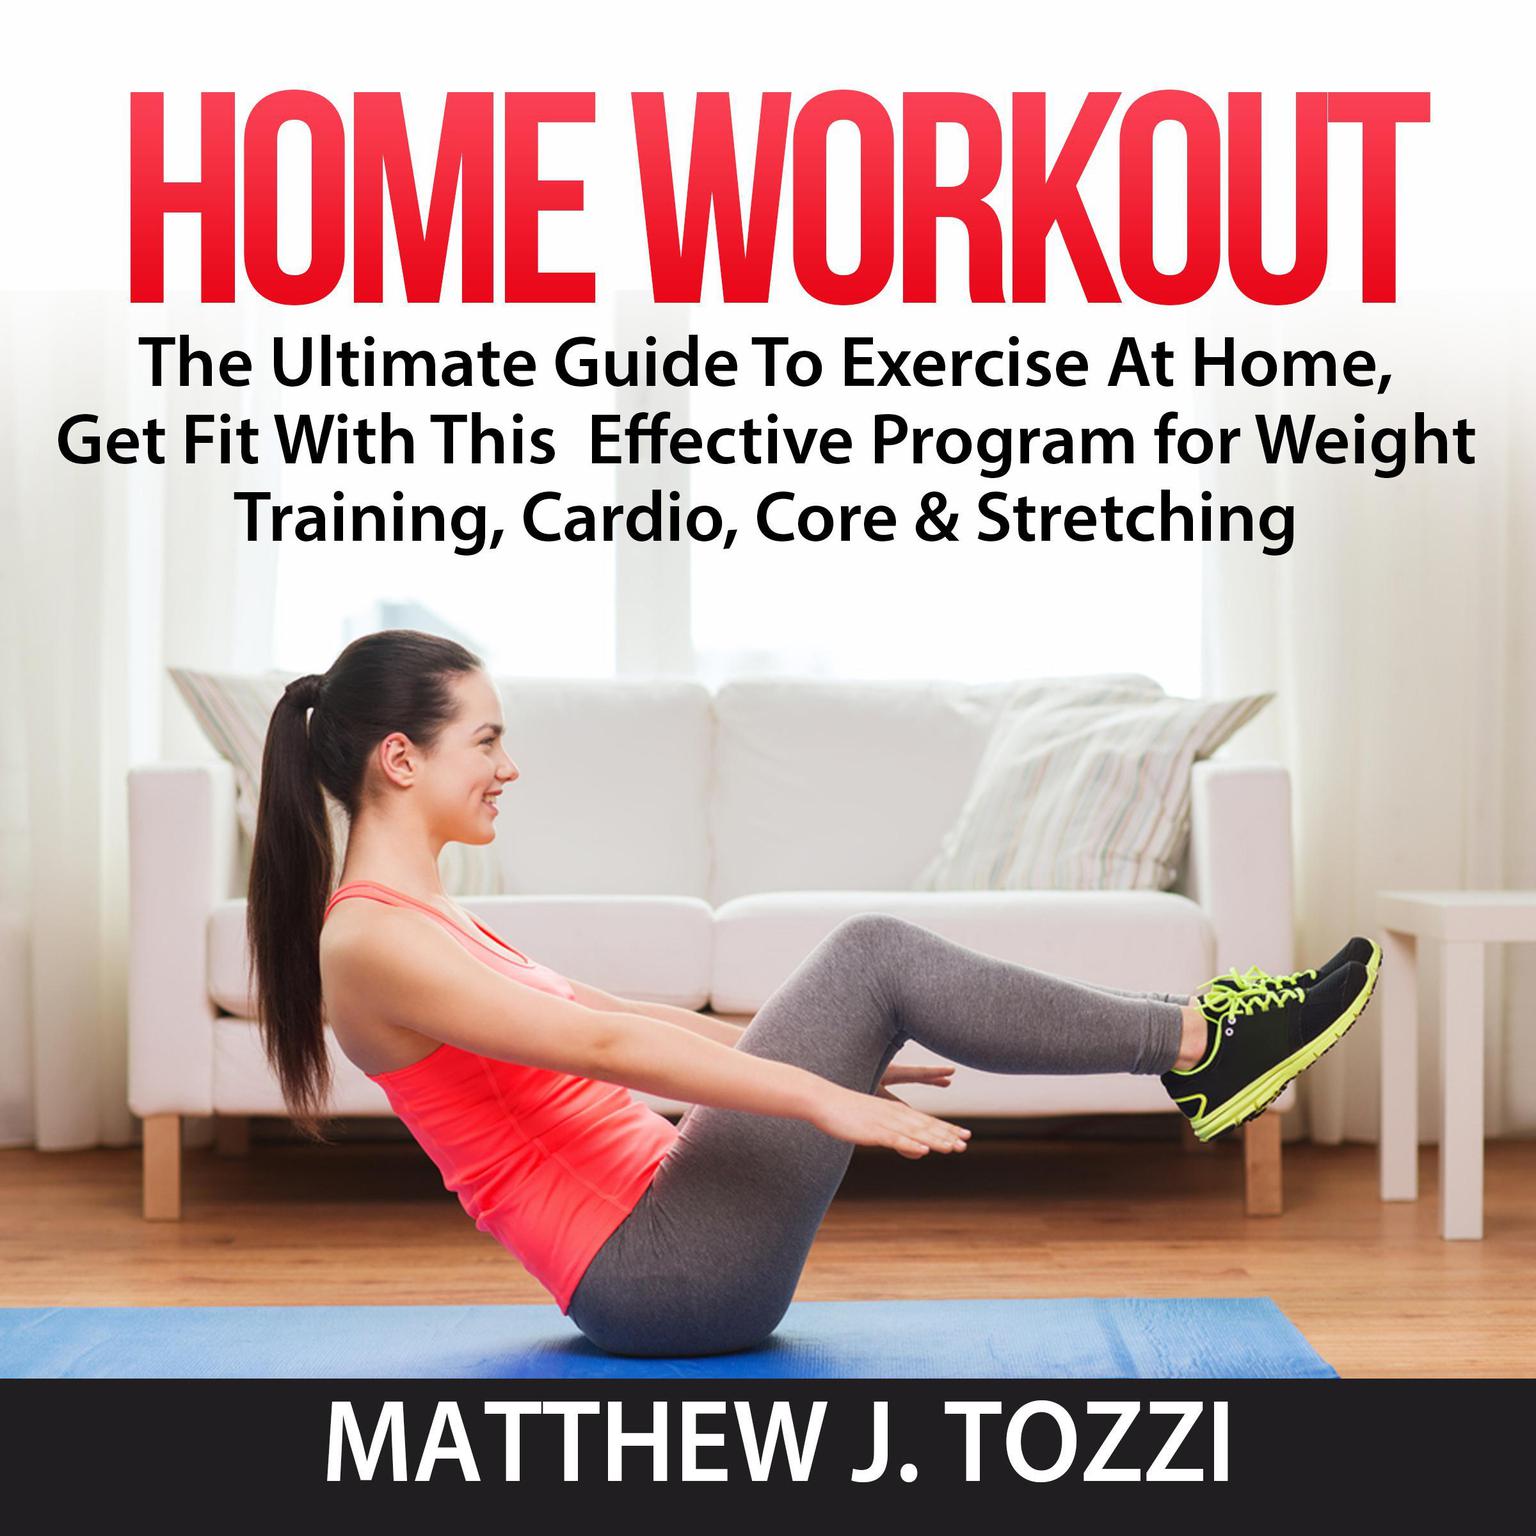 Home Workout: The Ultimate Guide To Exercise At Home, Get Fit With This  Effective Program for Weight Training, Cardio, Core & Stretching Audiobook, by Matthew J. Tozzi